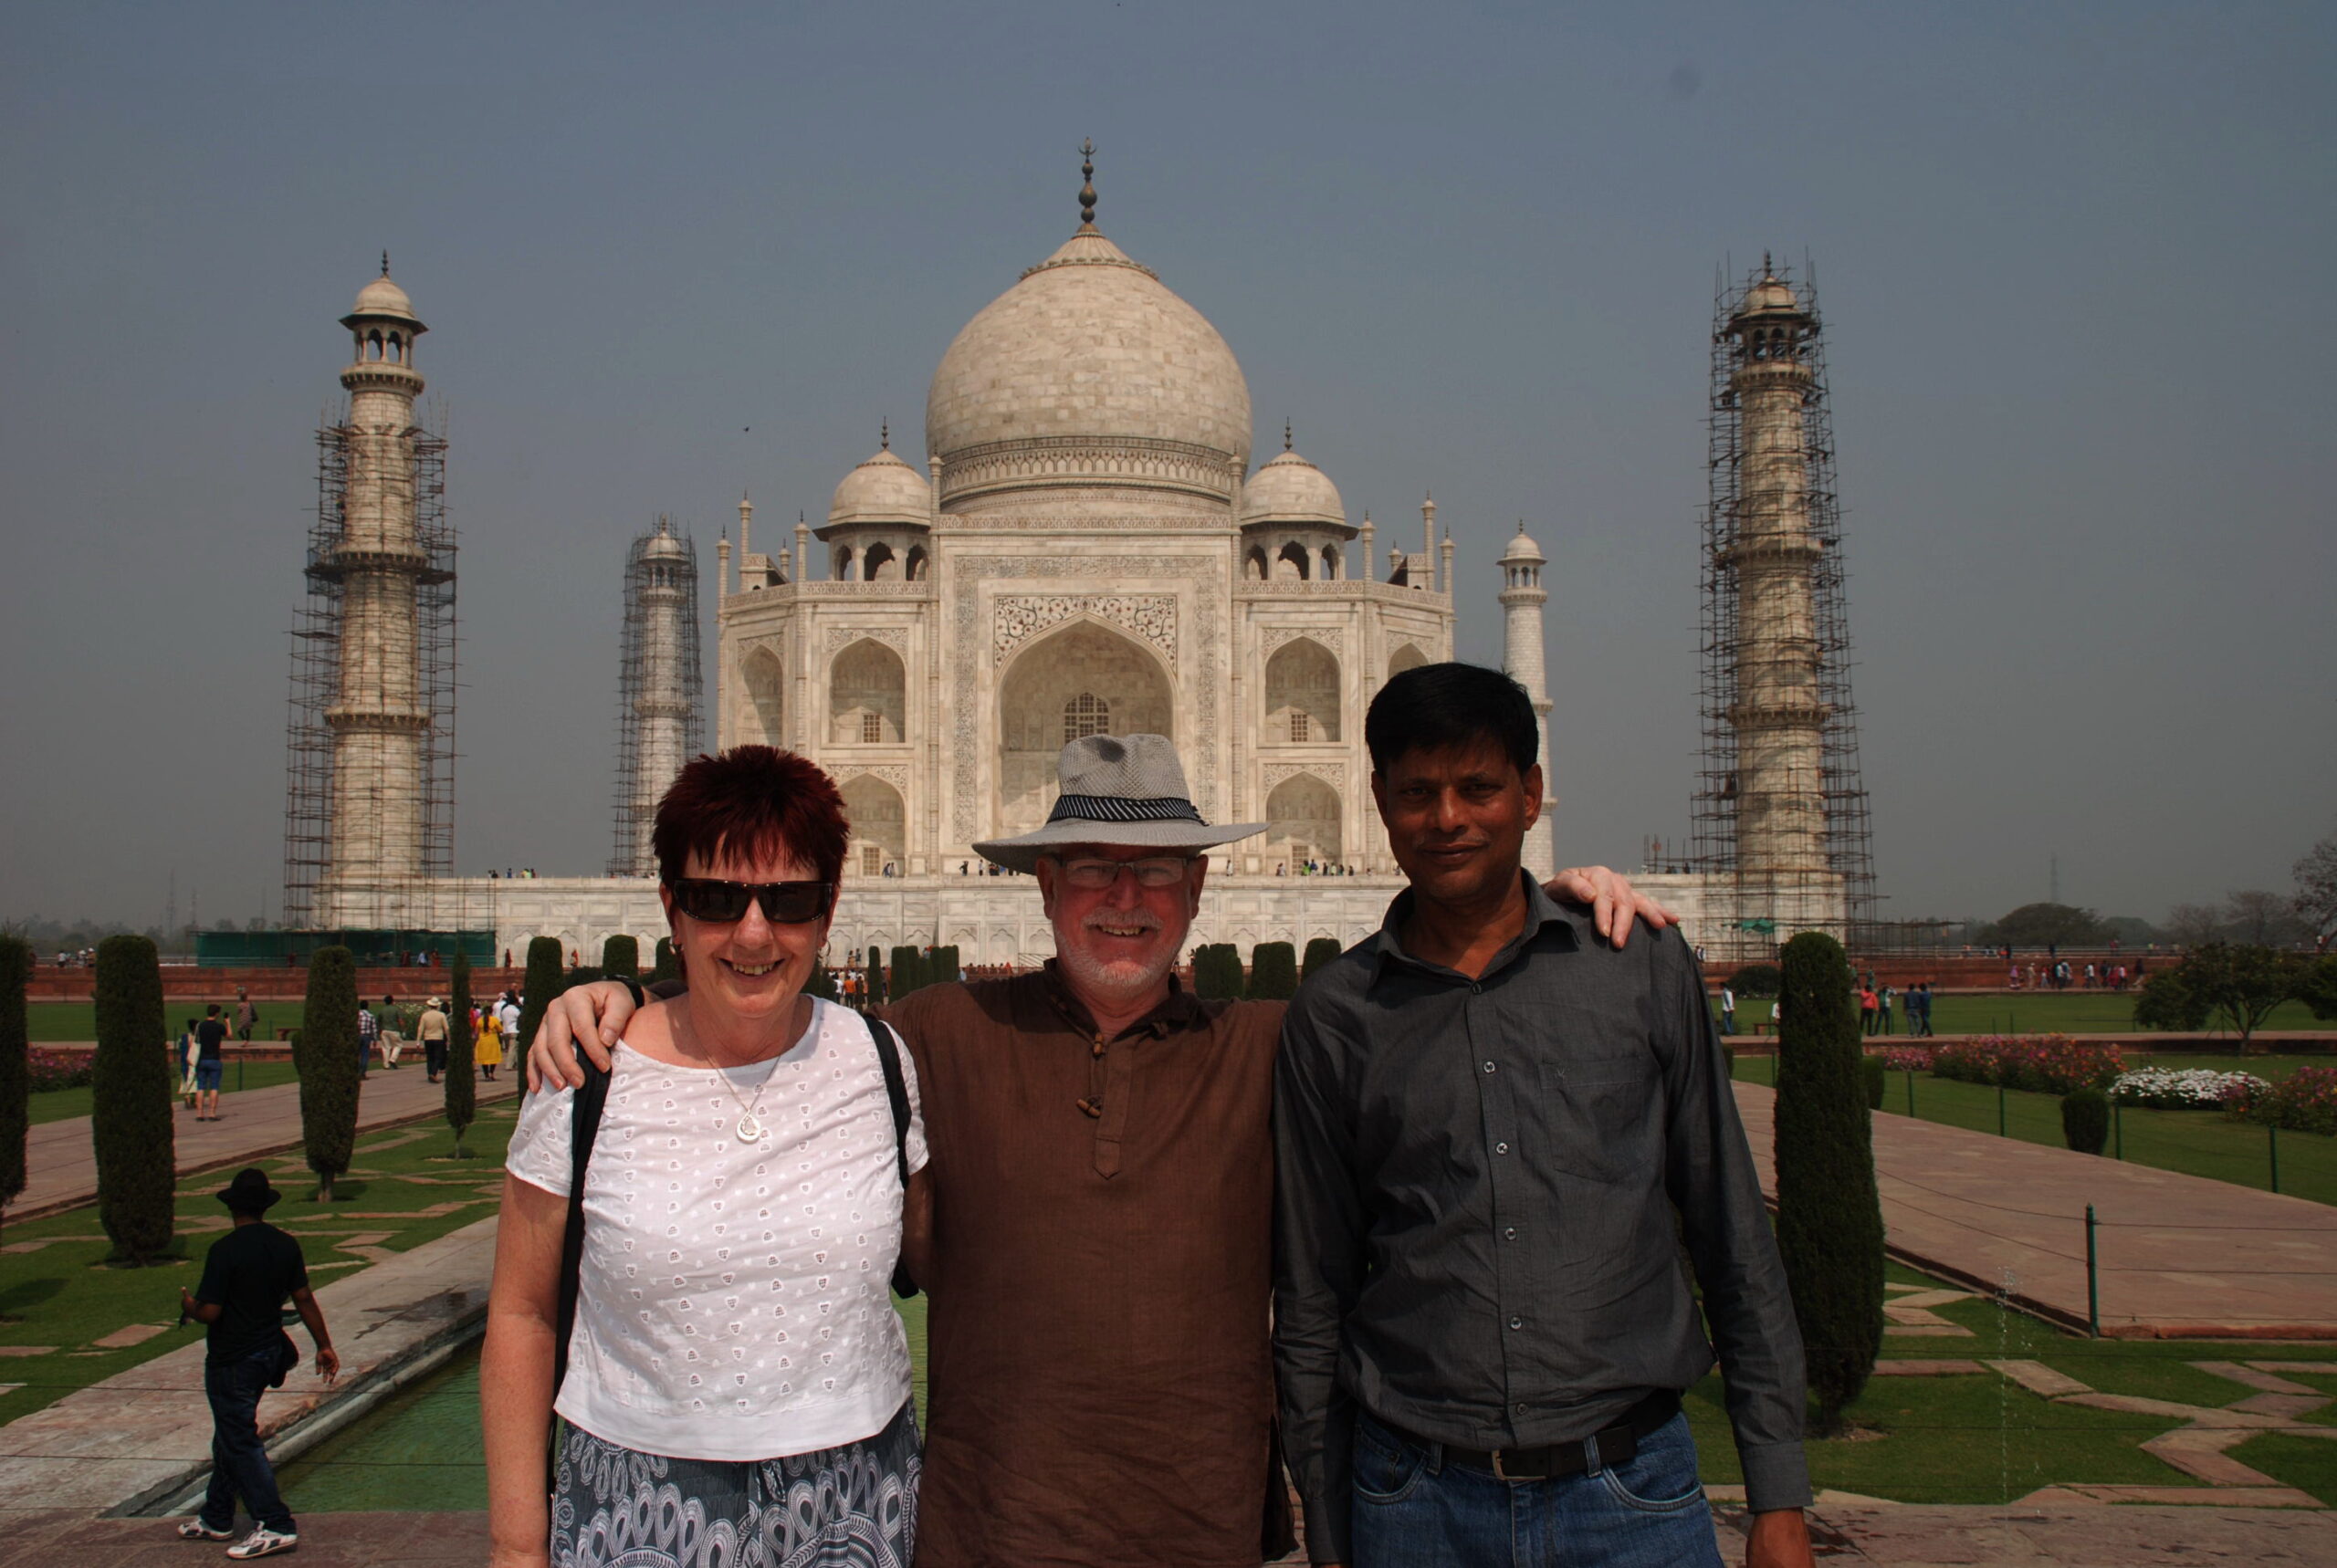 hari of gumtree travells, dave and janet,